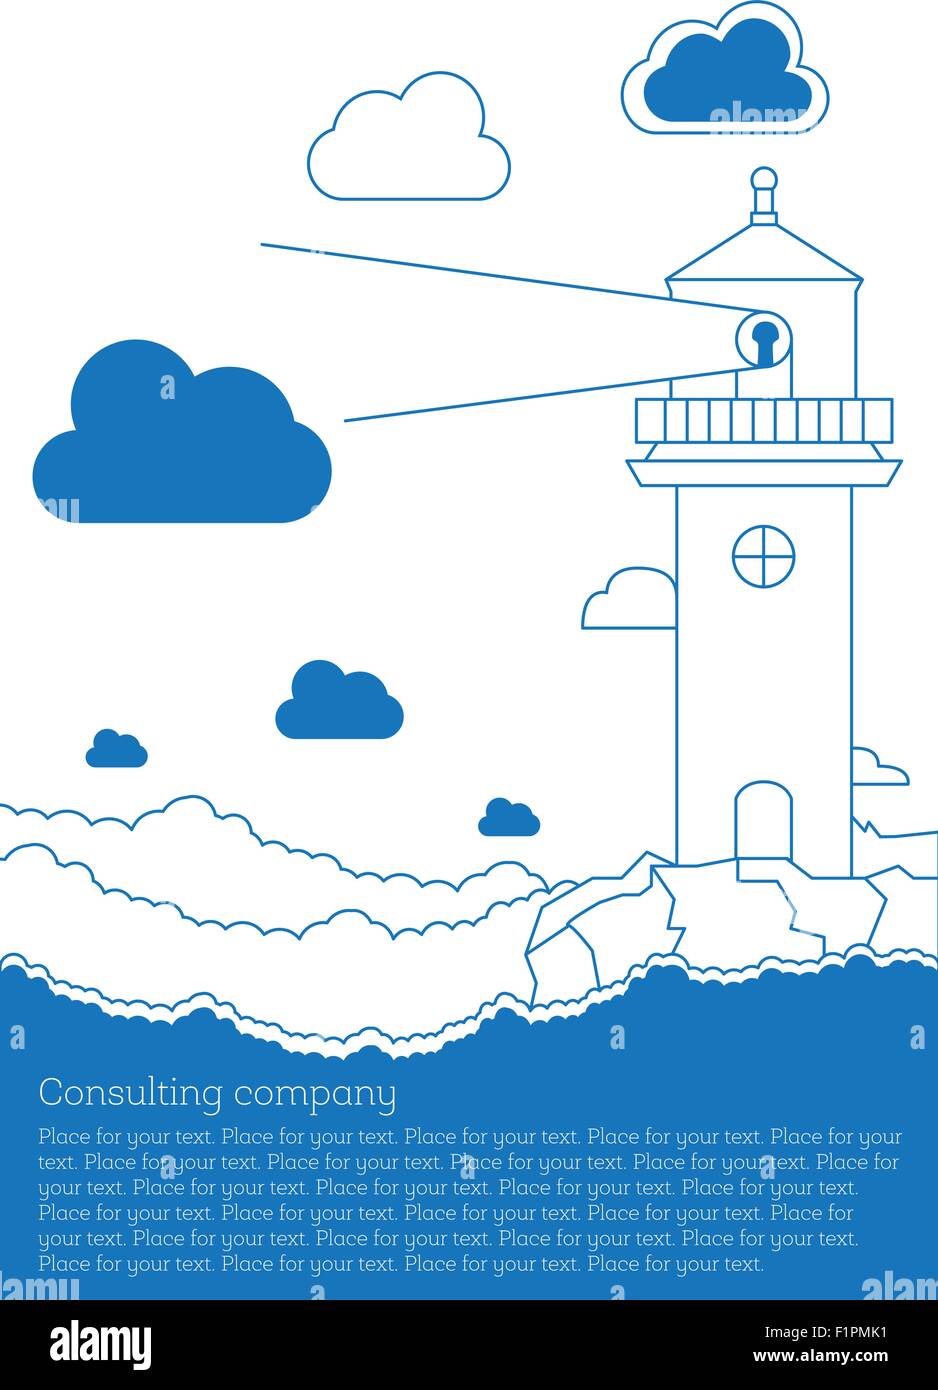 Vector illustration with lighthouse for consulting company for use in magazines or newspapers Stock Vector